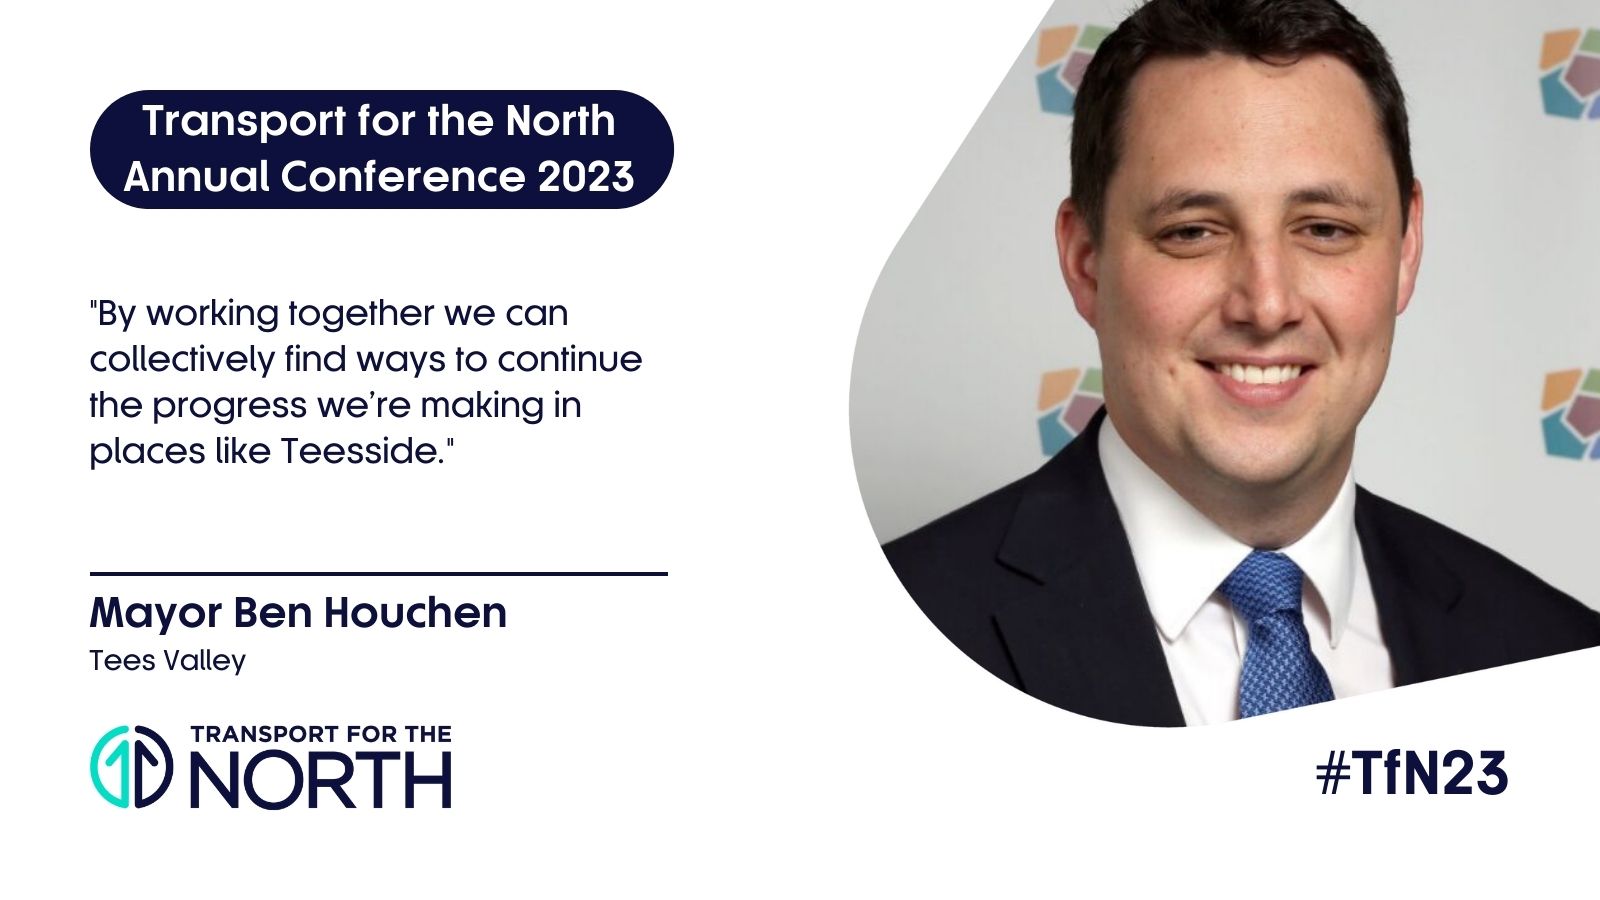 Mayor Ben Houchen quote for TfN Annual Conference